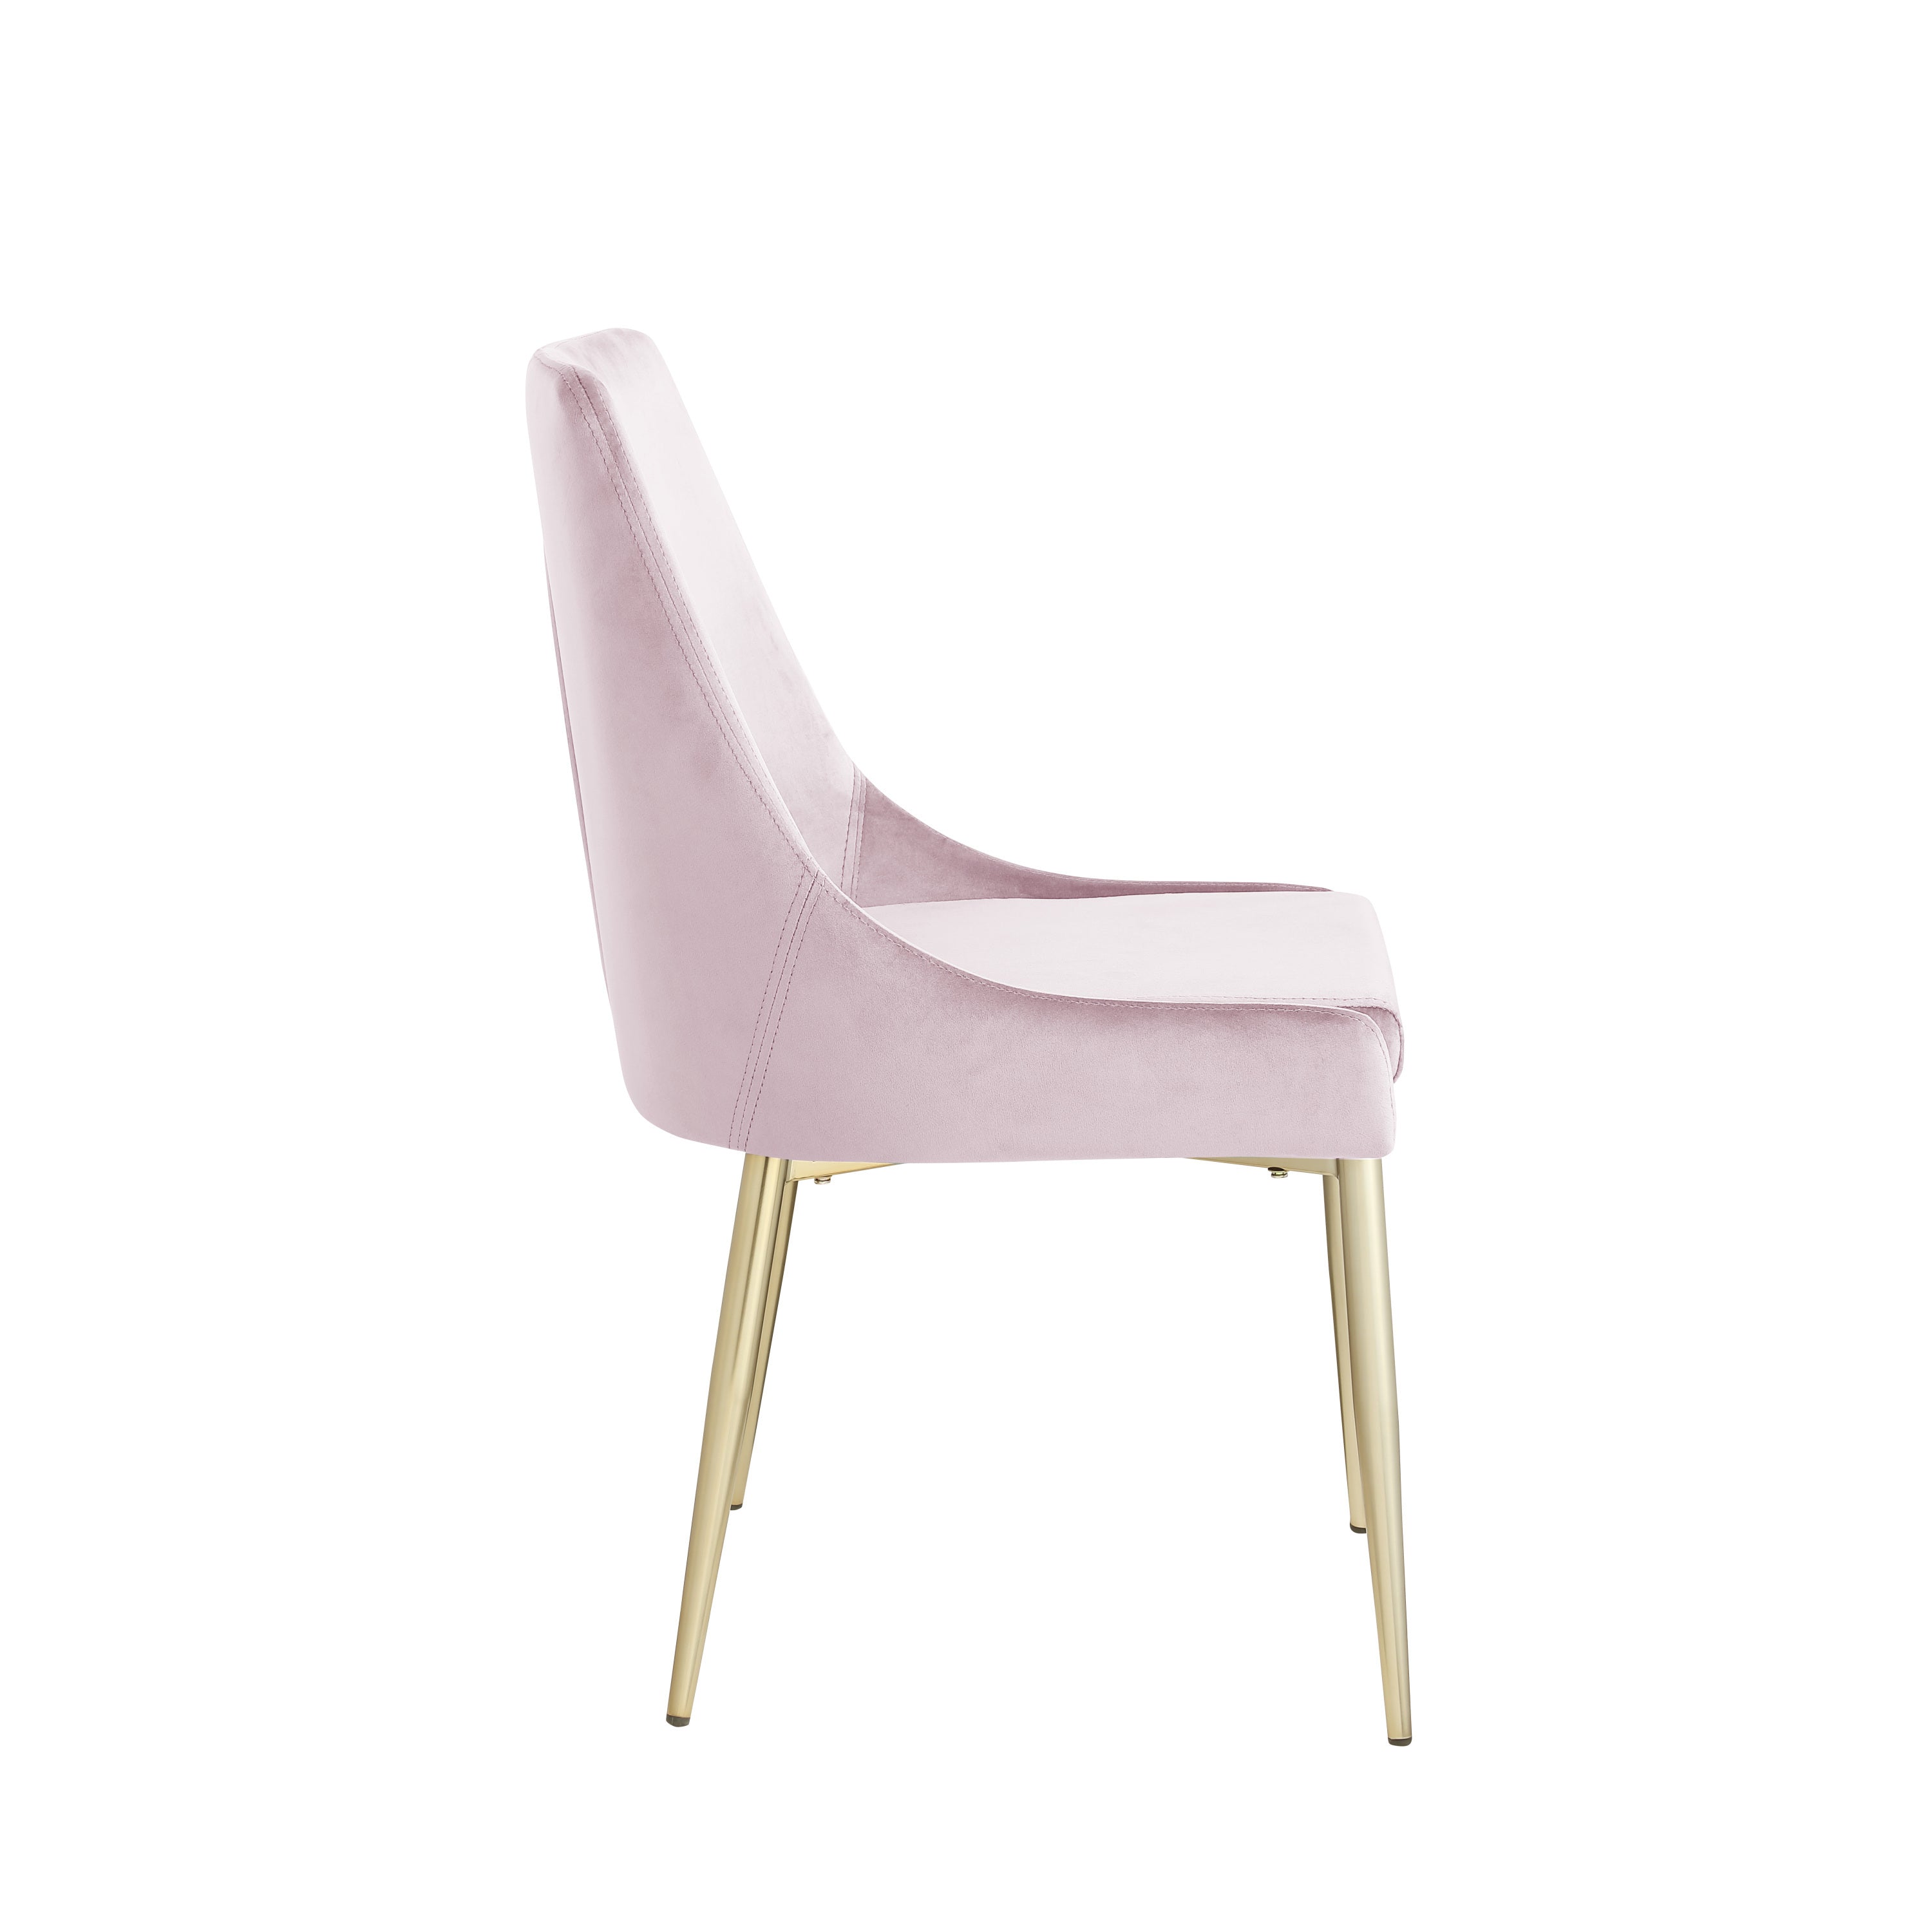 Contemporary Velvet Upholstered Dining Chair with Sturdy Metal Legs (Set of 2) Light Pink